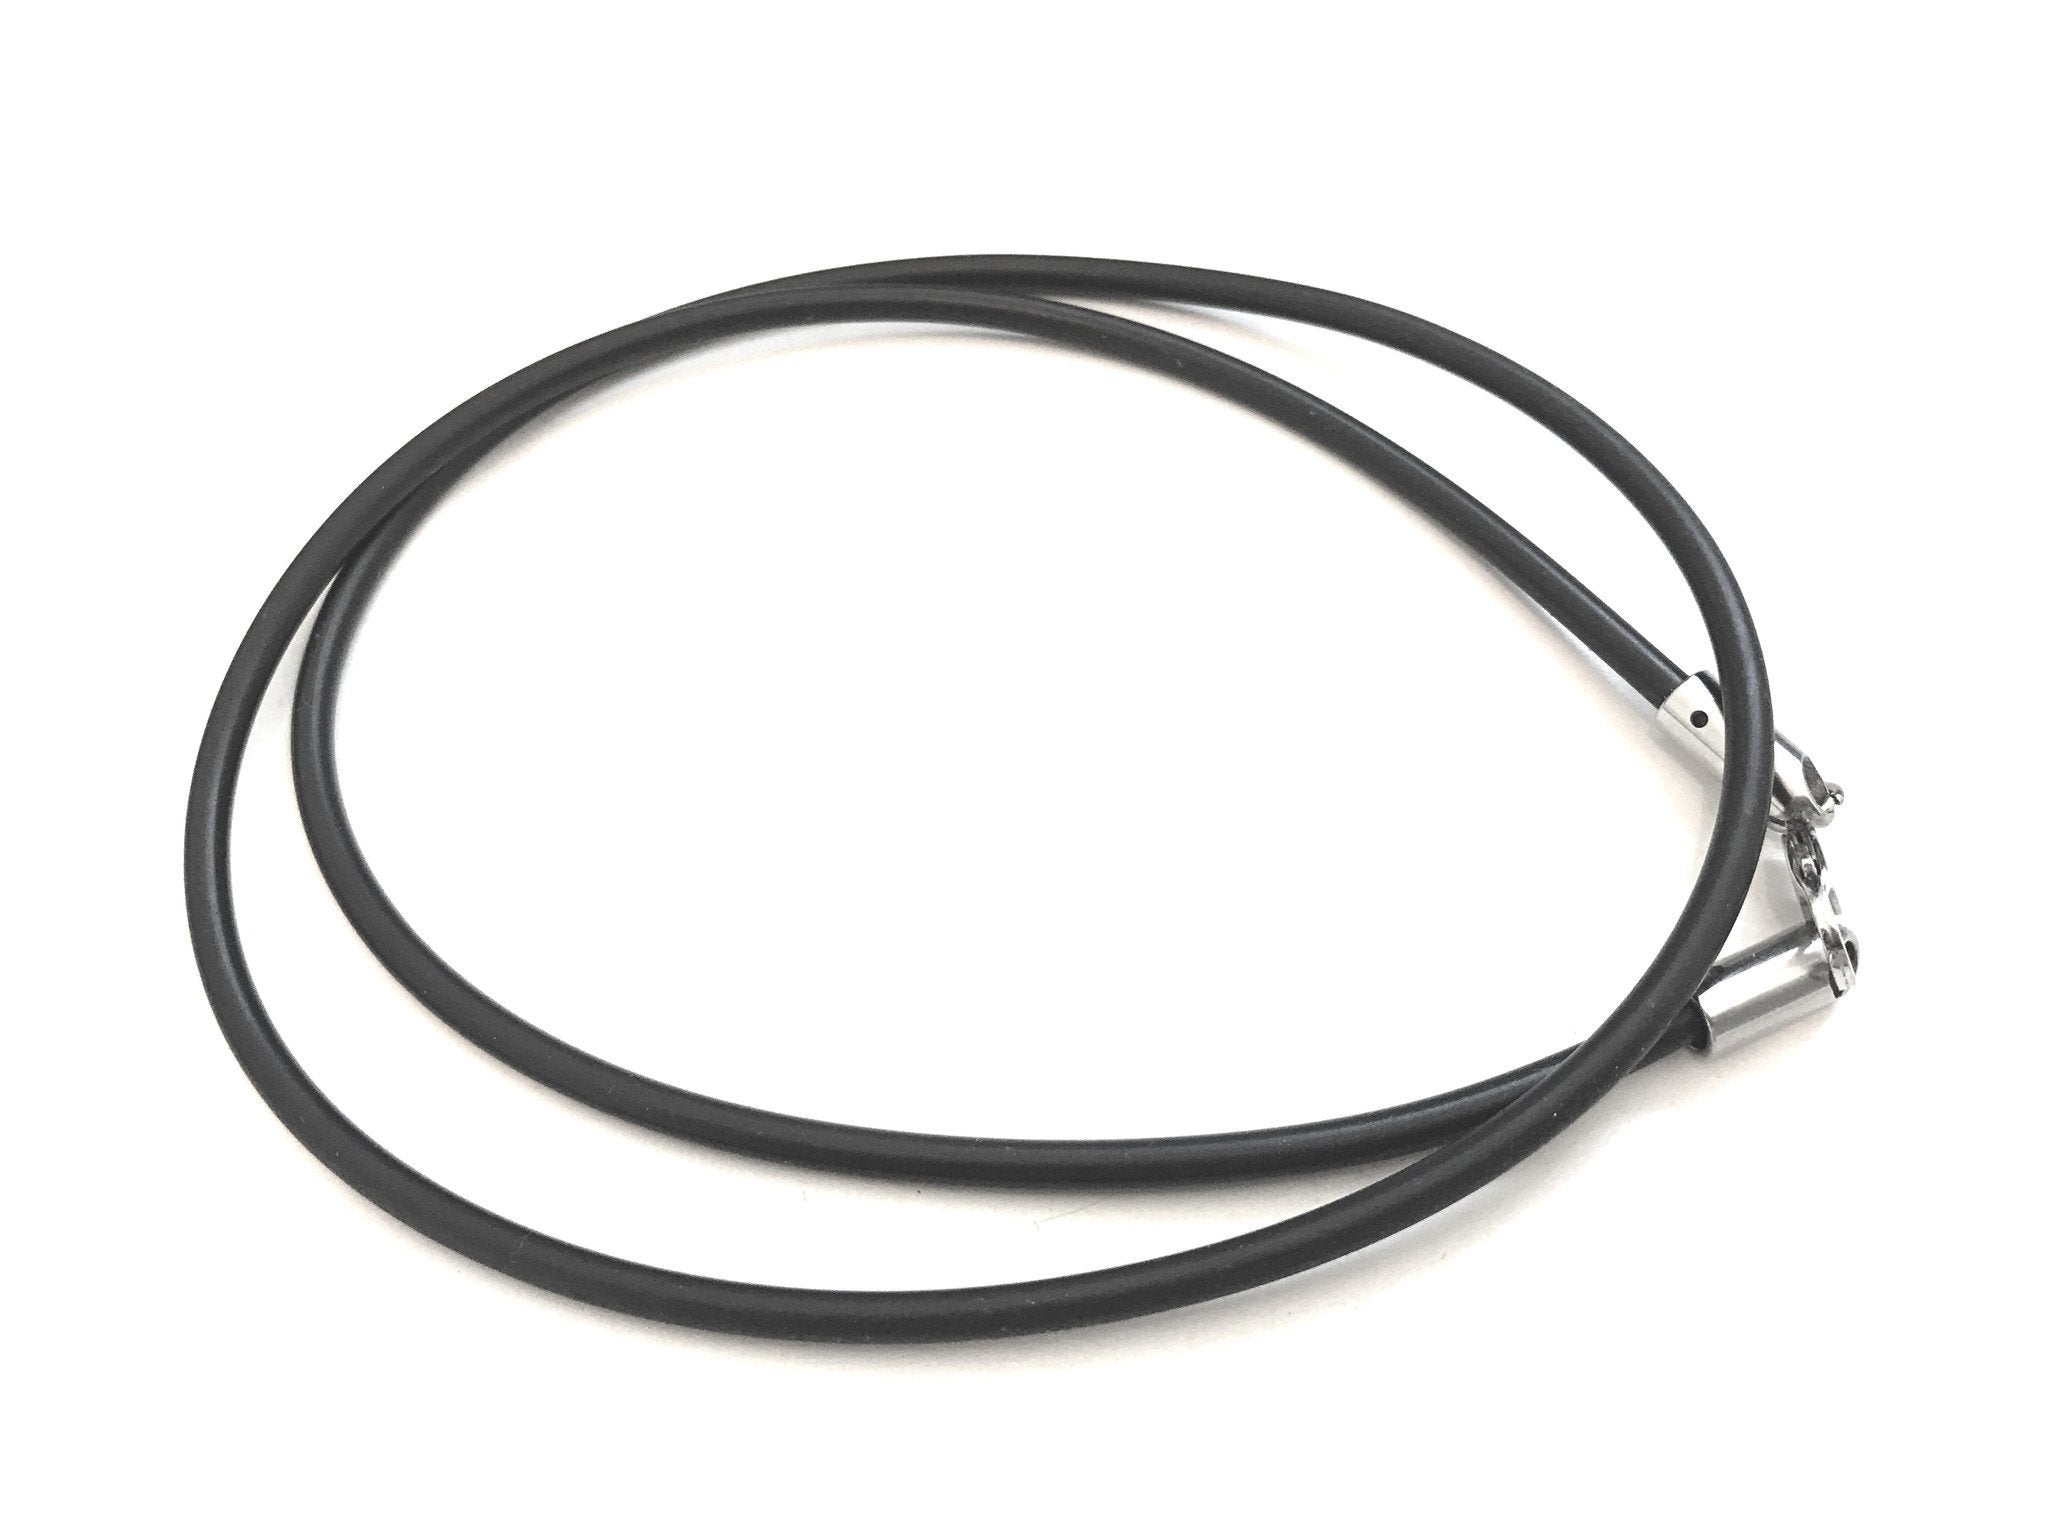 BEON.COM.AU Cudworth thin Black Rubber Necklace featuring: - 3 mm thick black rubber cord - 55 cm long terminated with Stainless Steel lobster Clasp - Comes in official Cudworth gift pouch. Looking for a thicker rubber necklace? See our thicker Cudworth Black Rubber Necklace. Necklaces Cudworth at BEON.COM.AU